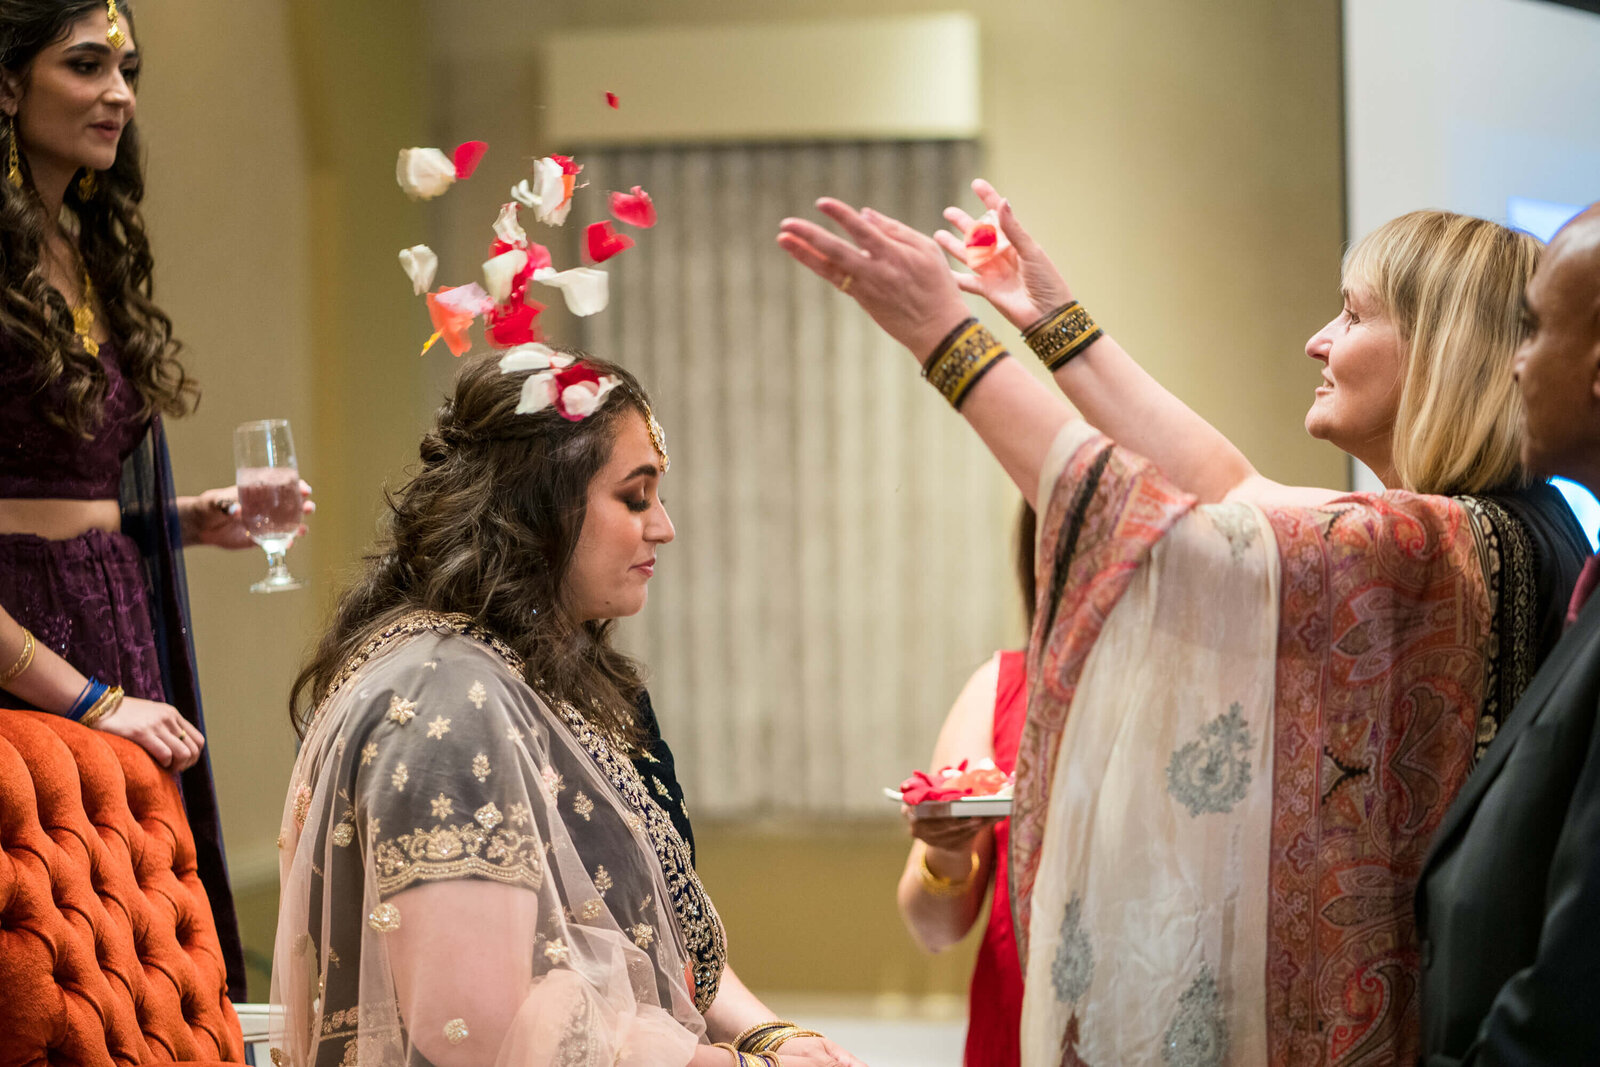 East Indian Bride showered with rose pedals